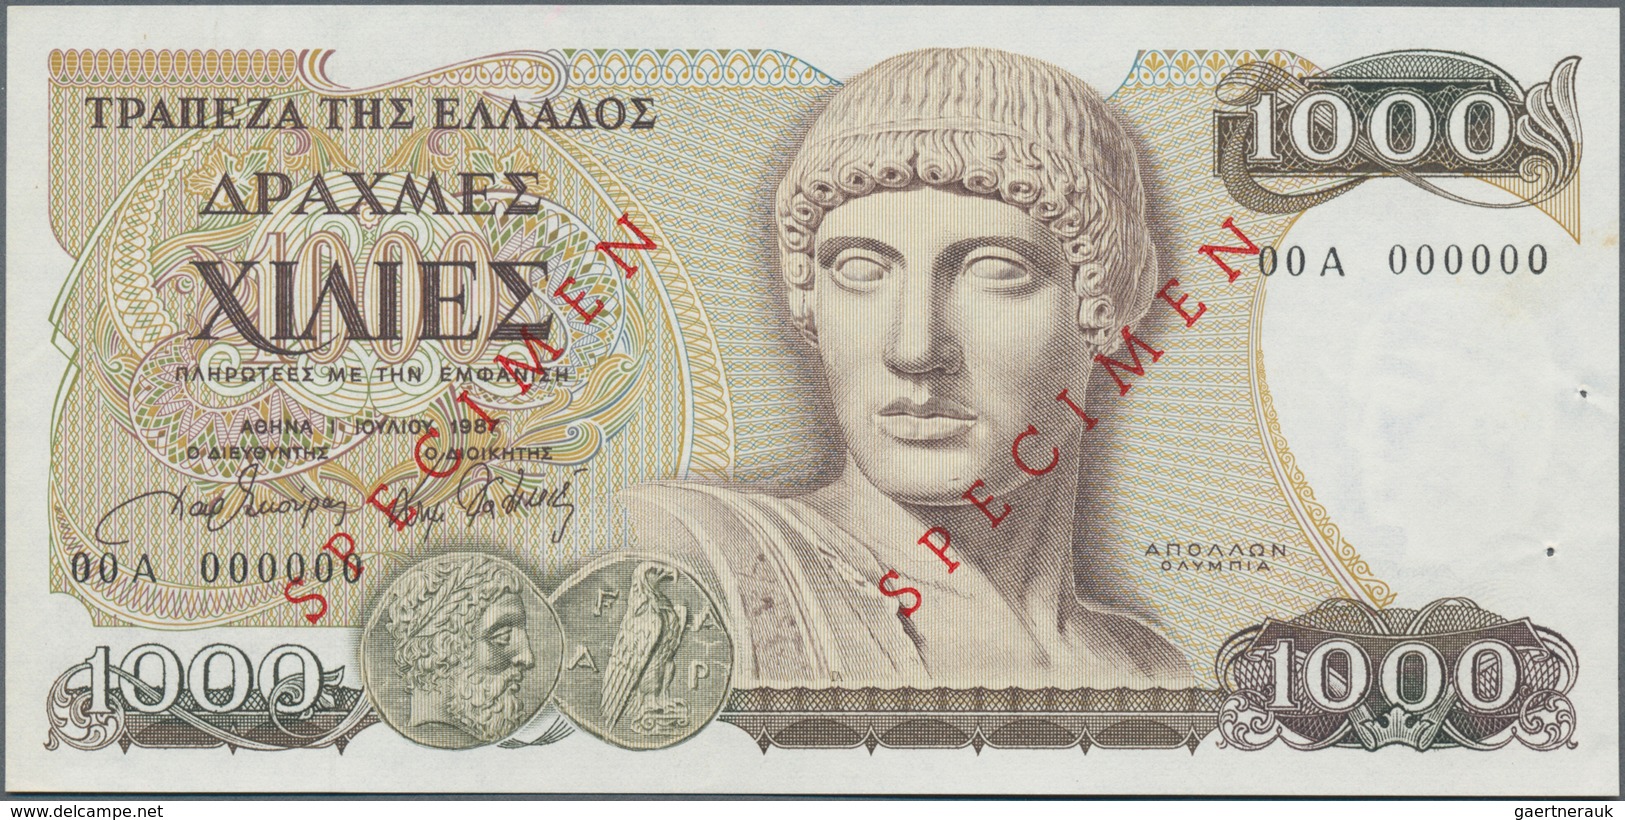 Greece / Griechenland: 1000 Drachmai 1987 SPECIMEN, P.202s, Serial Number 00A 000000 And Red Overpri - Griechenland